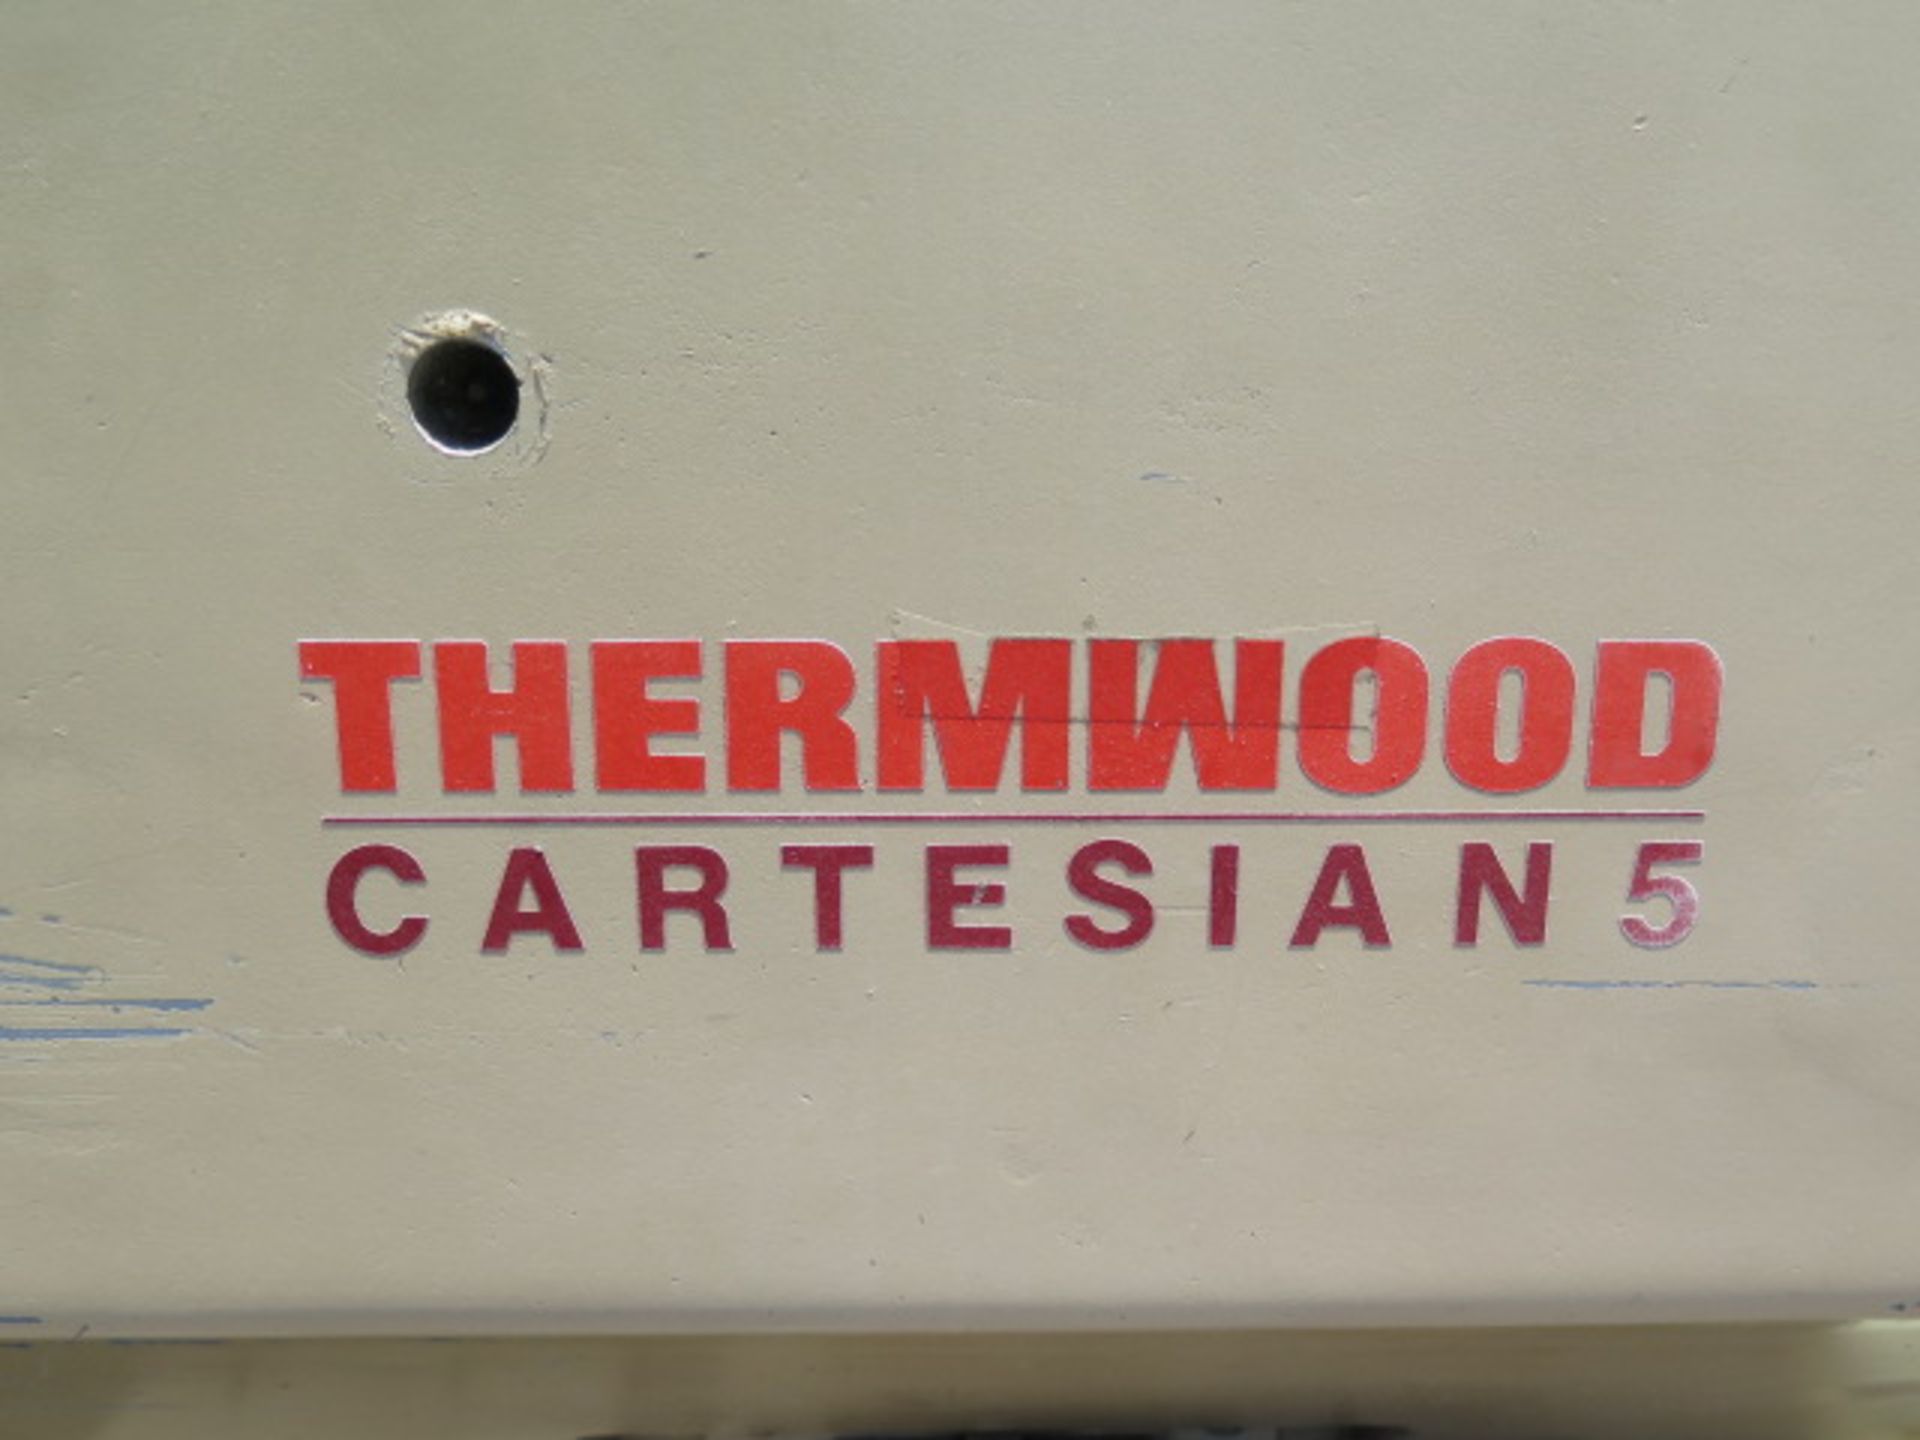 Thermwood "Cartesian 5" mdl. C50 CNC Router s/n 120PA0017070784 (SOLD AS-IS - NO WARRANTY) - Image 10 of 10